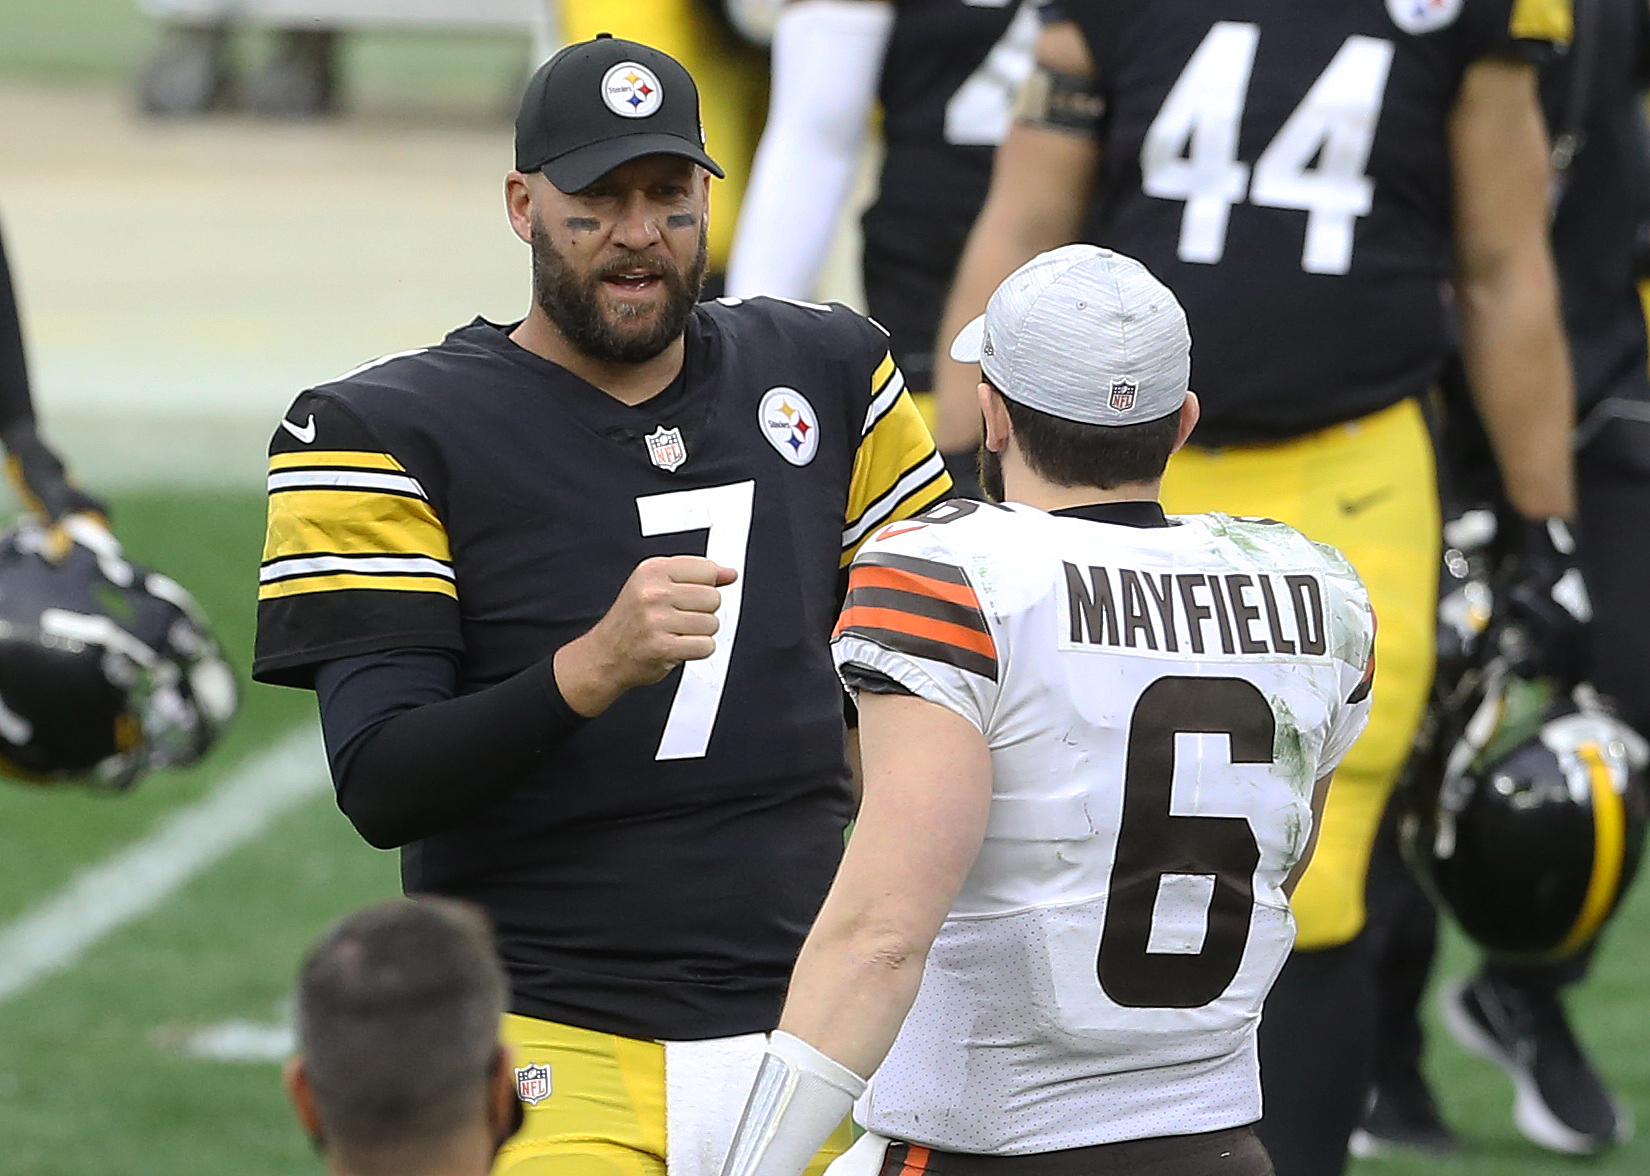 Pittsburgh Steelers quarterback Ben Roethlisberger (7) and Cleveland Browns quarterback Baker Mayfield (6) meet at mid-field after a game at Heinz Field.